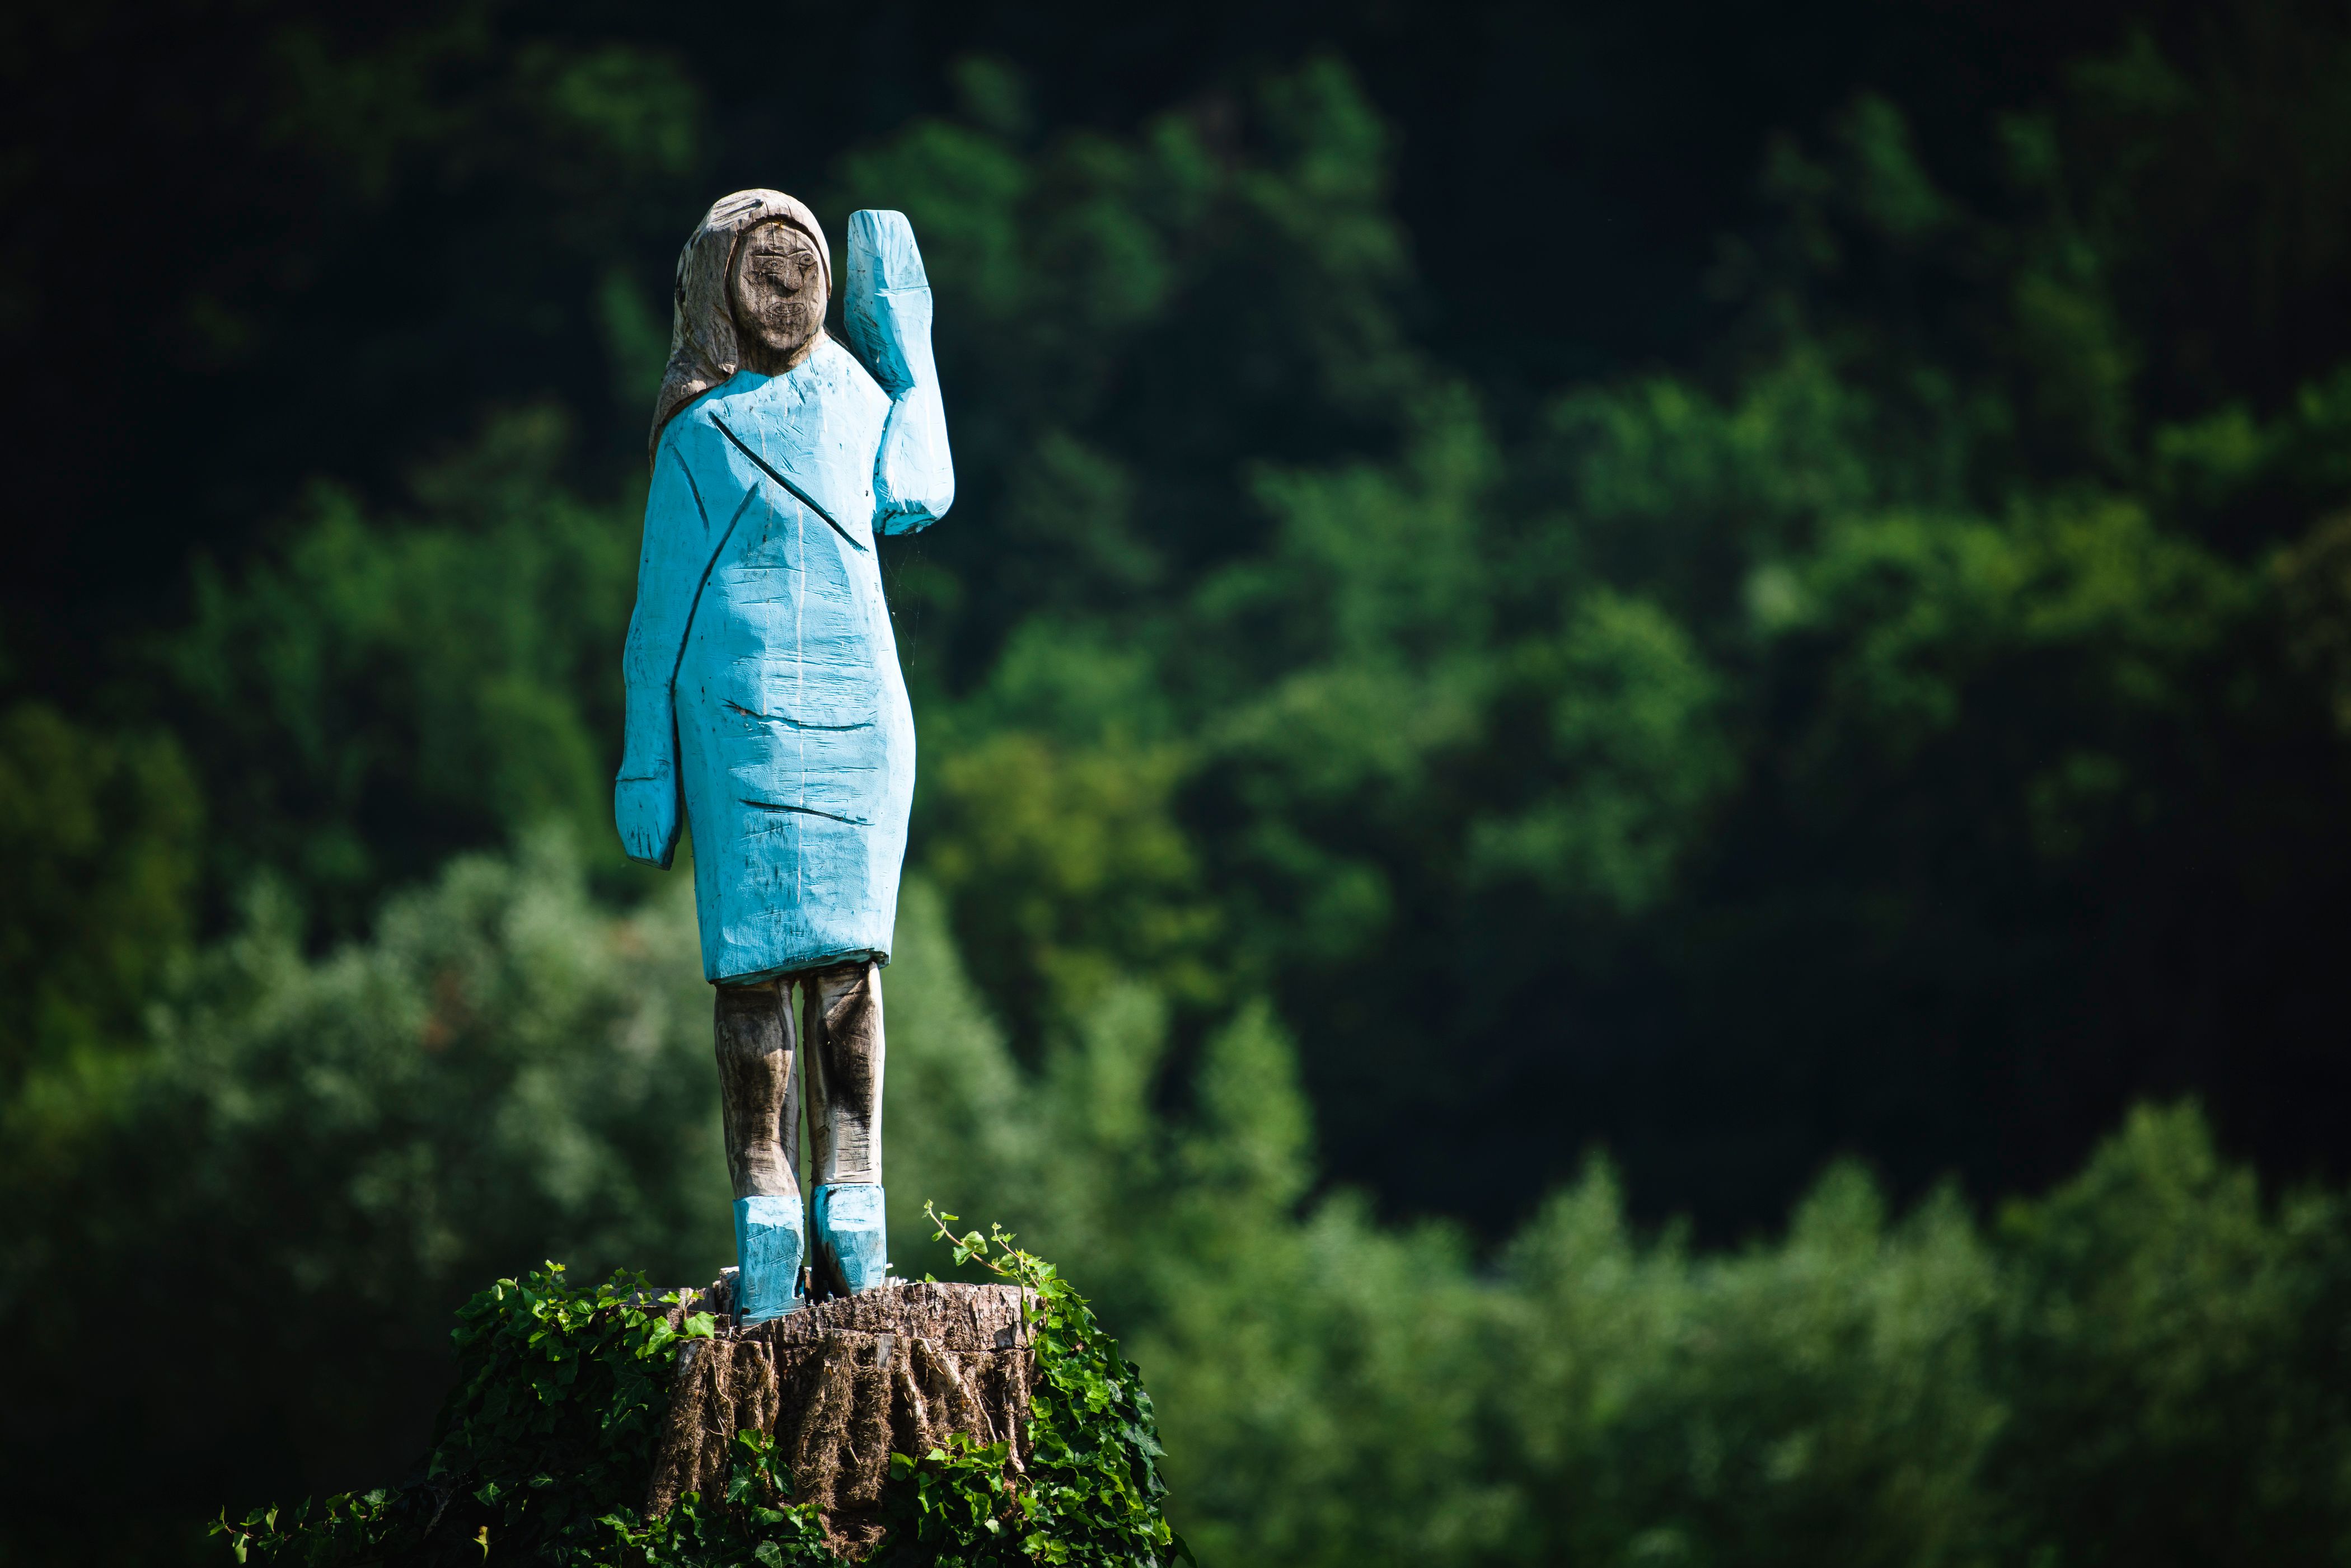 A picture taken on July 5, 2019 shows what conceptual artist Ales 'Maxi' Zupevc claims is the first ever monument of Melania Trump, set in the fields near town of Sevnica, the First Lady's hometown. (JURE MAKOVEC—AFP/Getty Images)